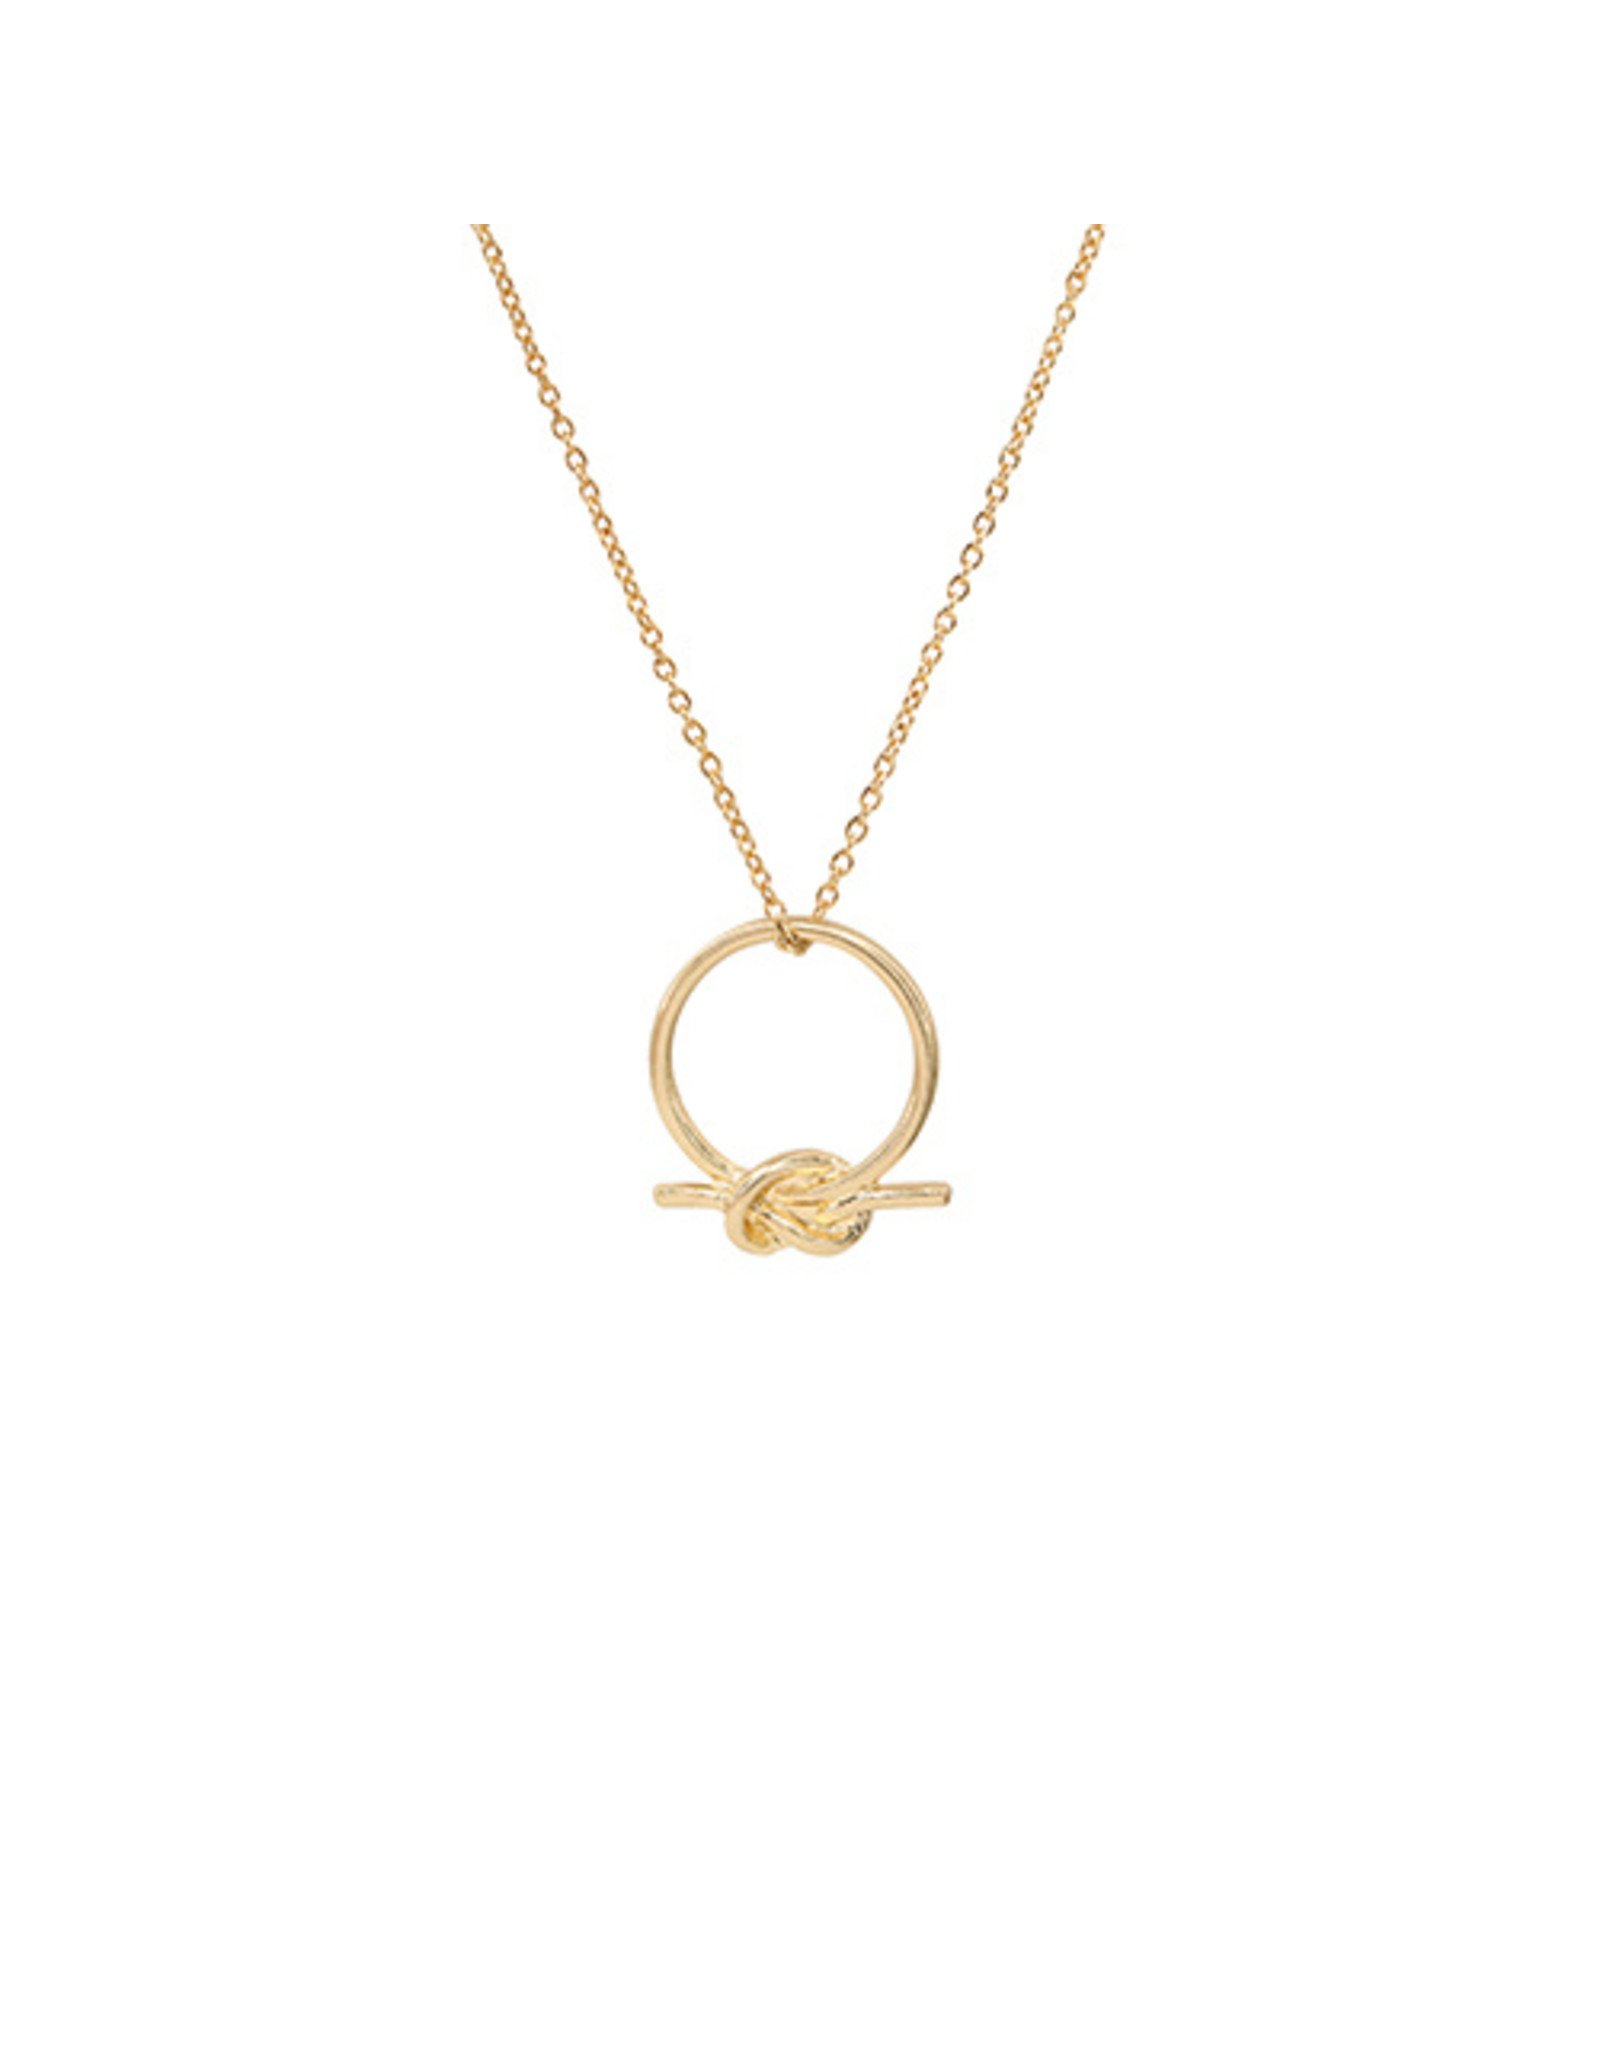 LATA Artisan Knotted Ring Necklace